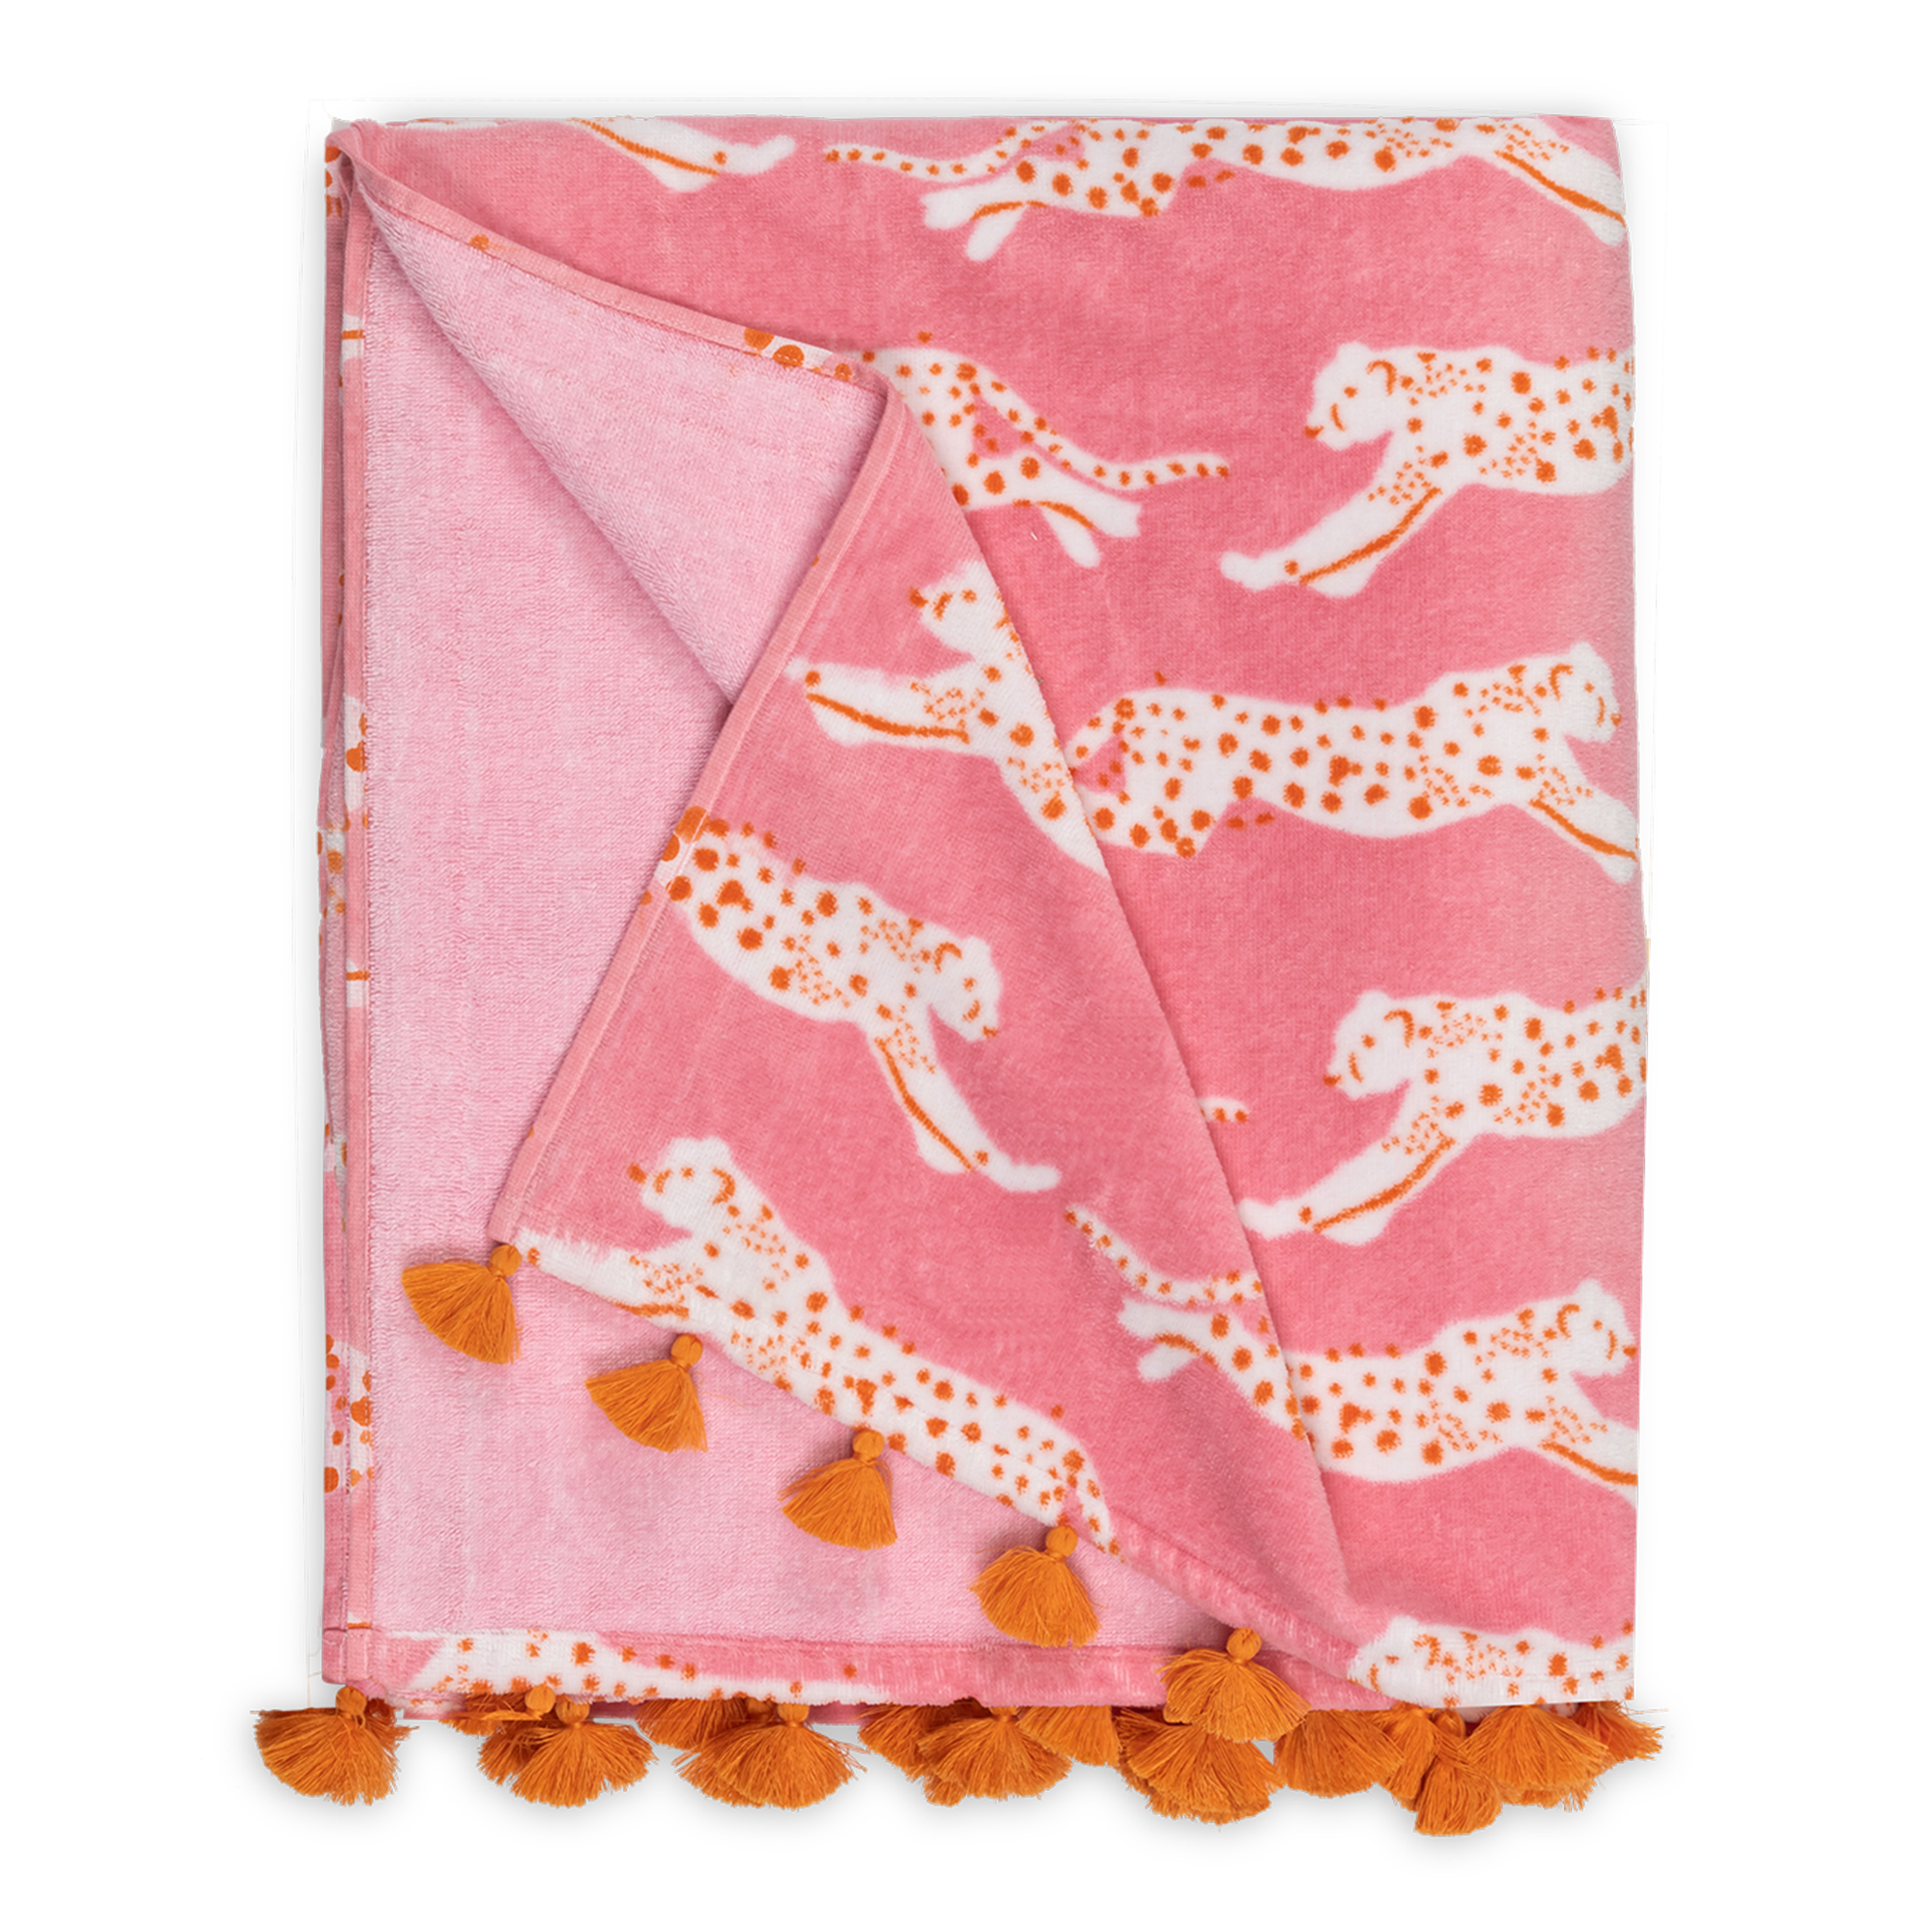 Folded Silo of Matouk Leaping Leopard Beach Towels in Color Pink Sugar